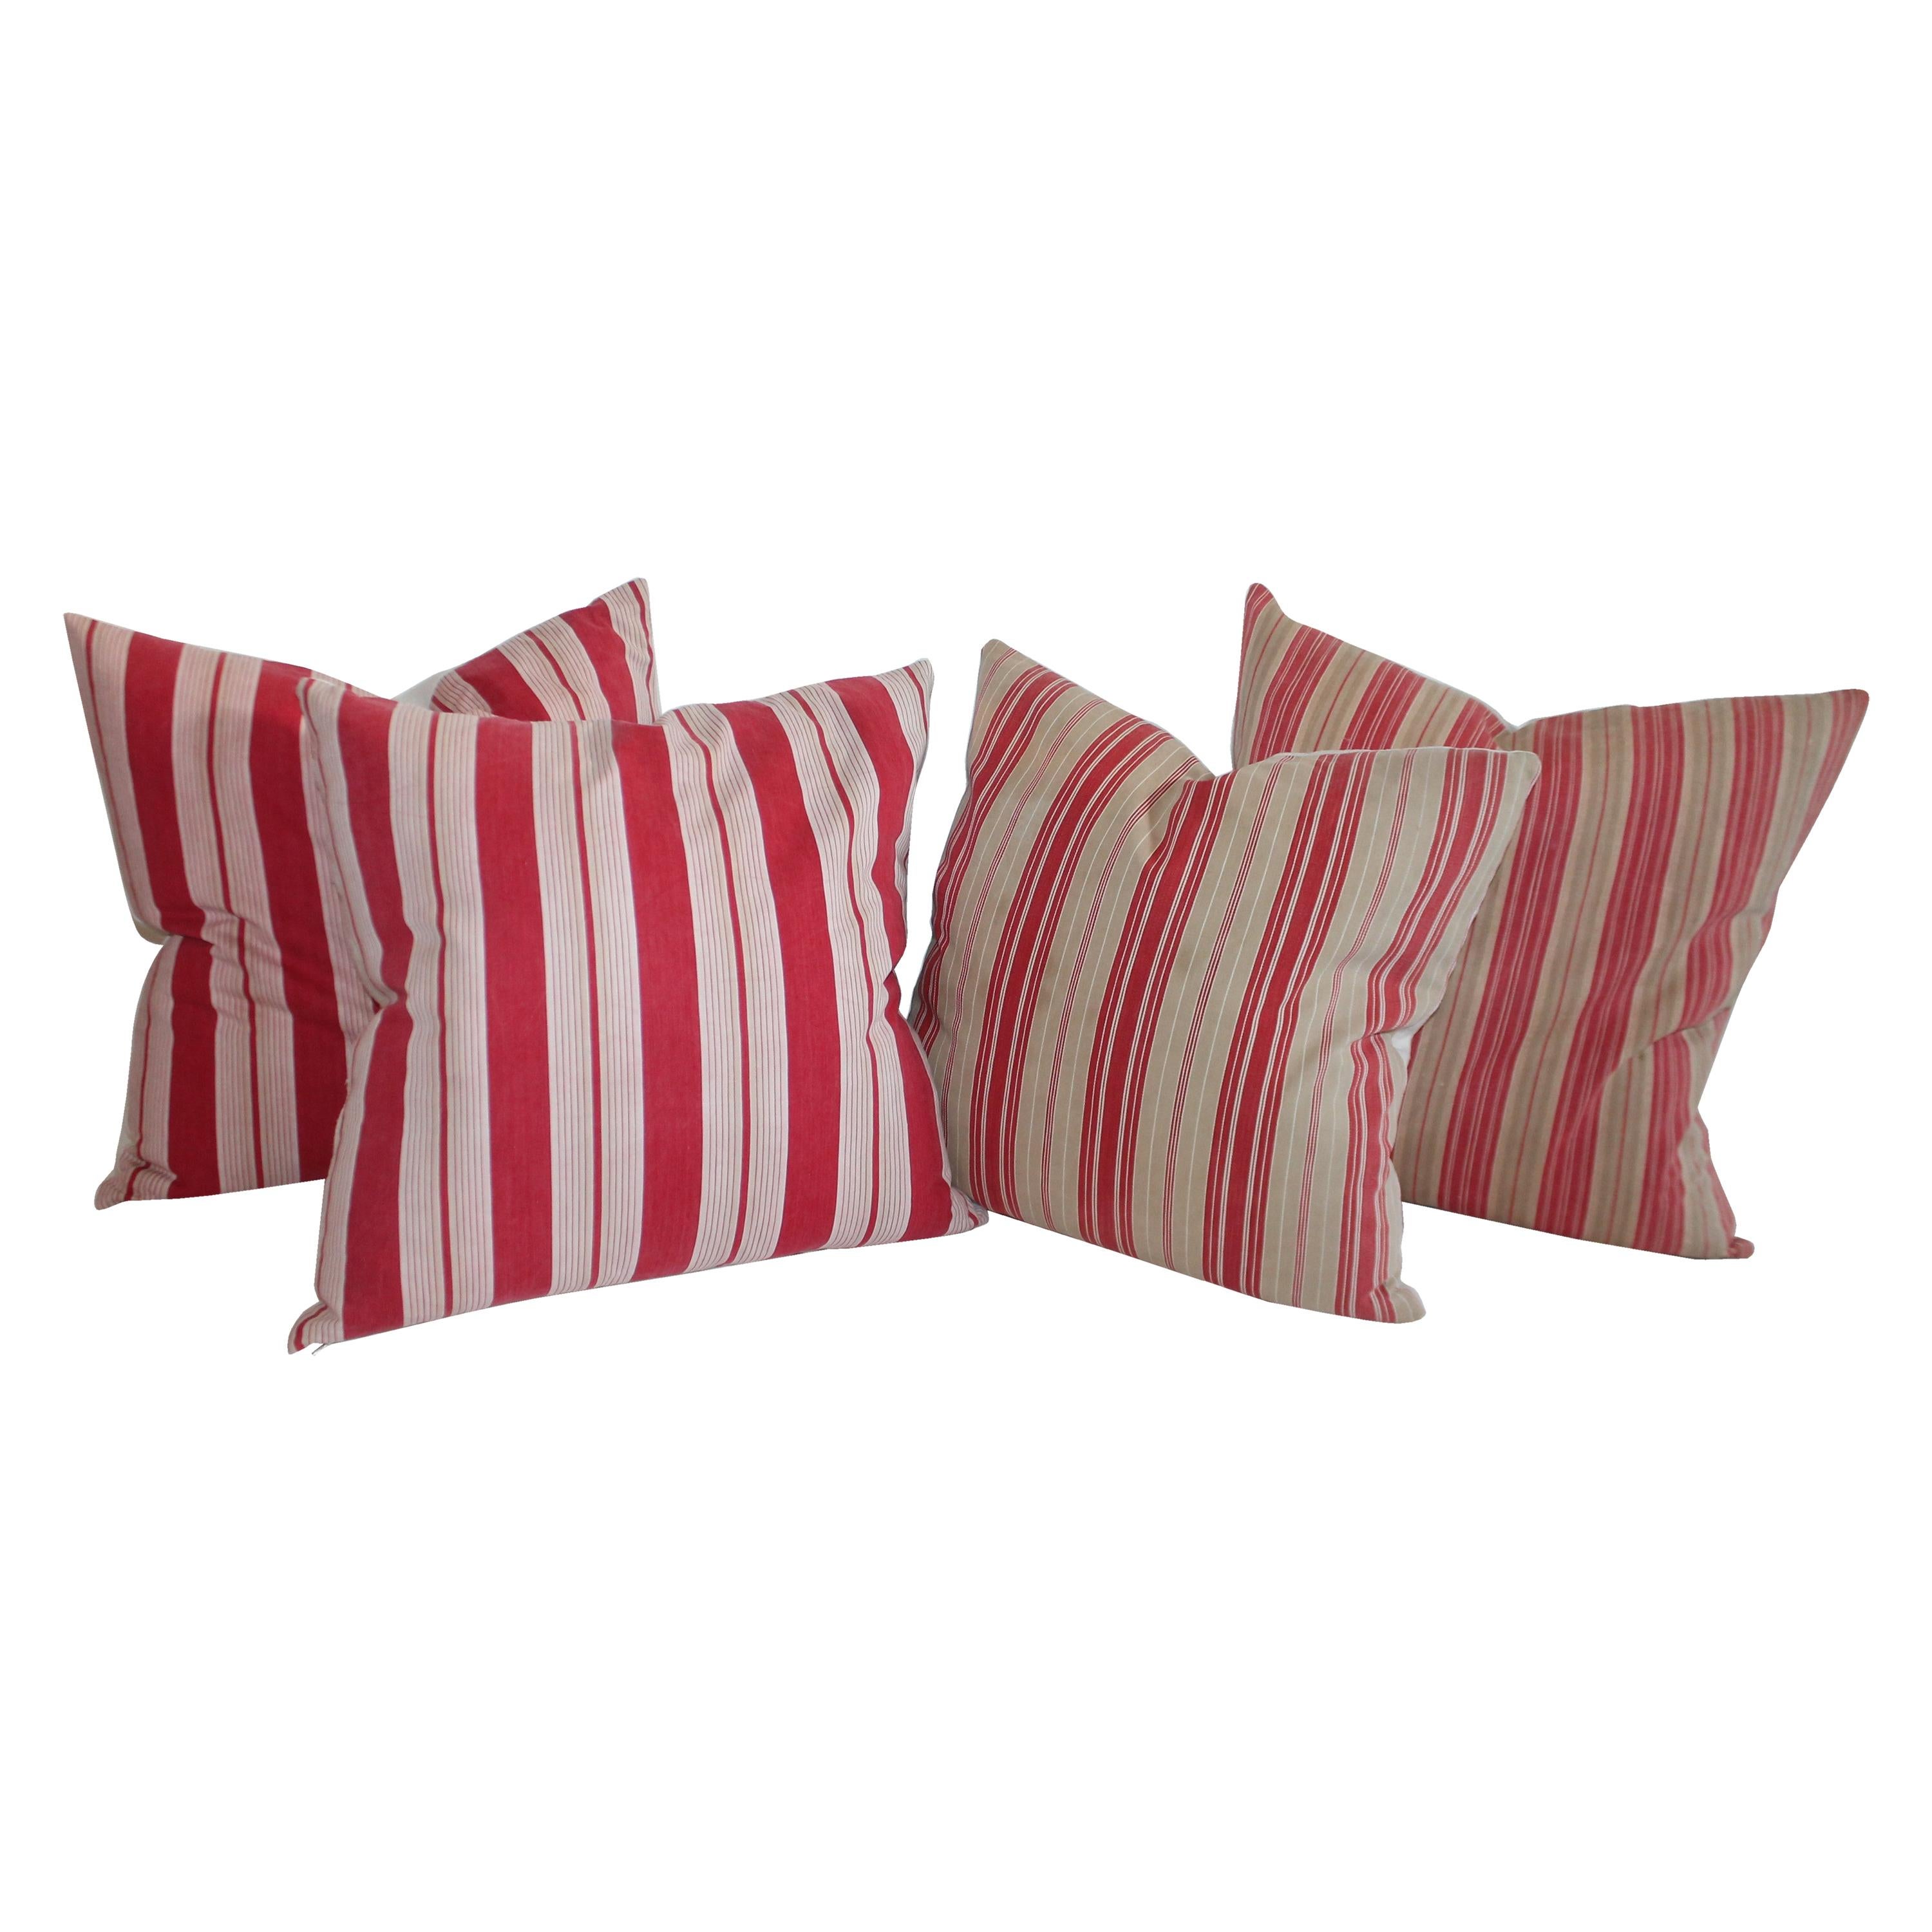 19th Century Antique Ticking Pillows / Two Pairs